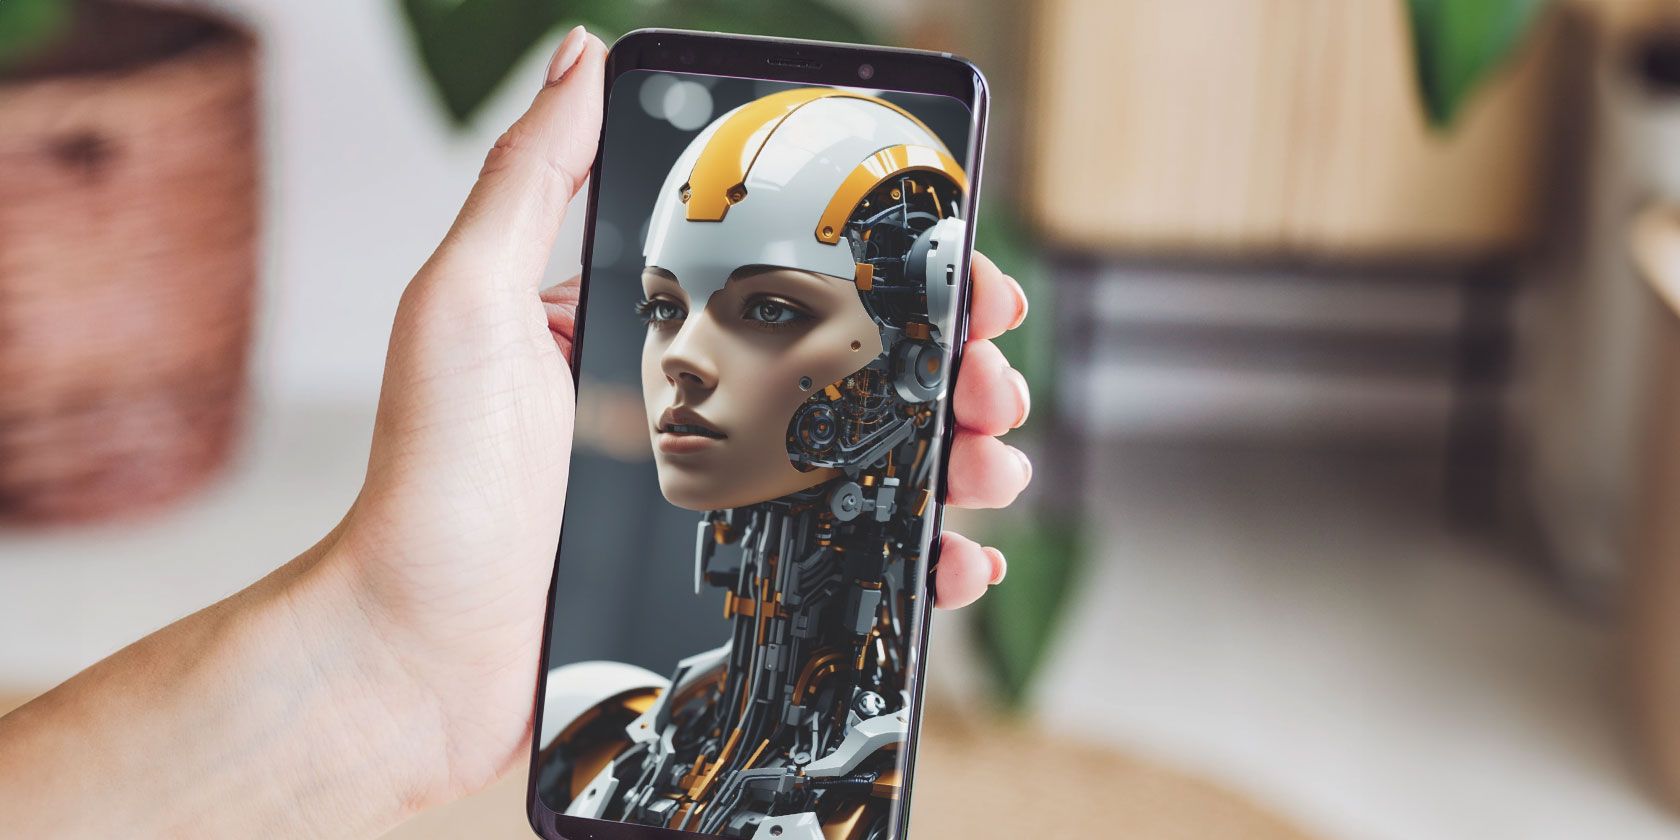 AI Robot on an Android phone screen